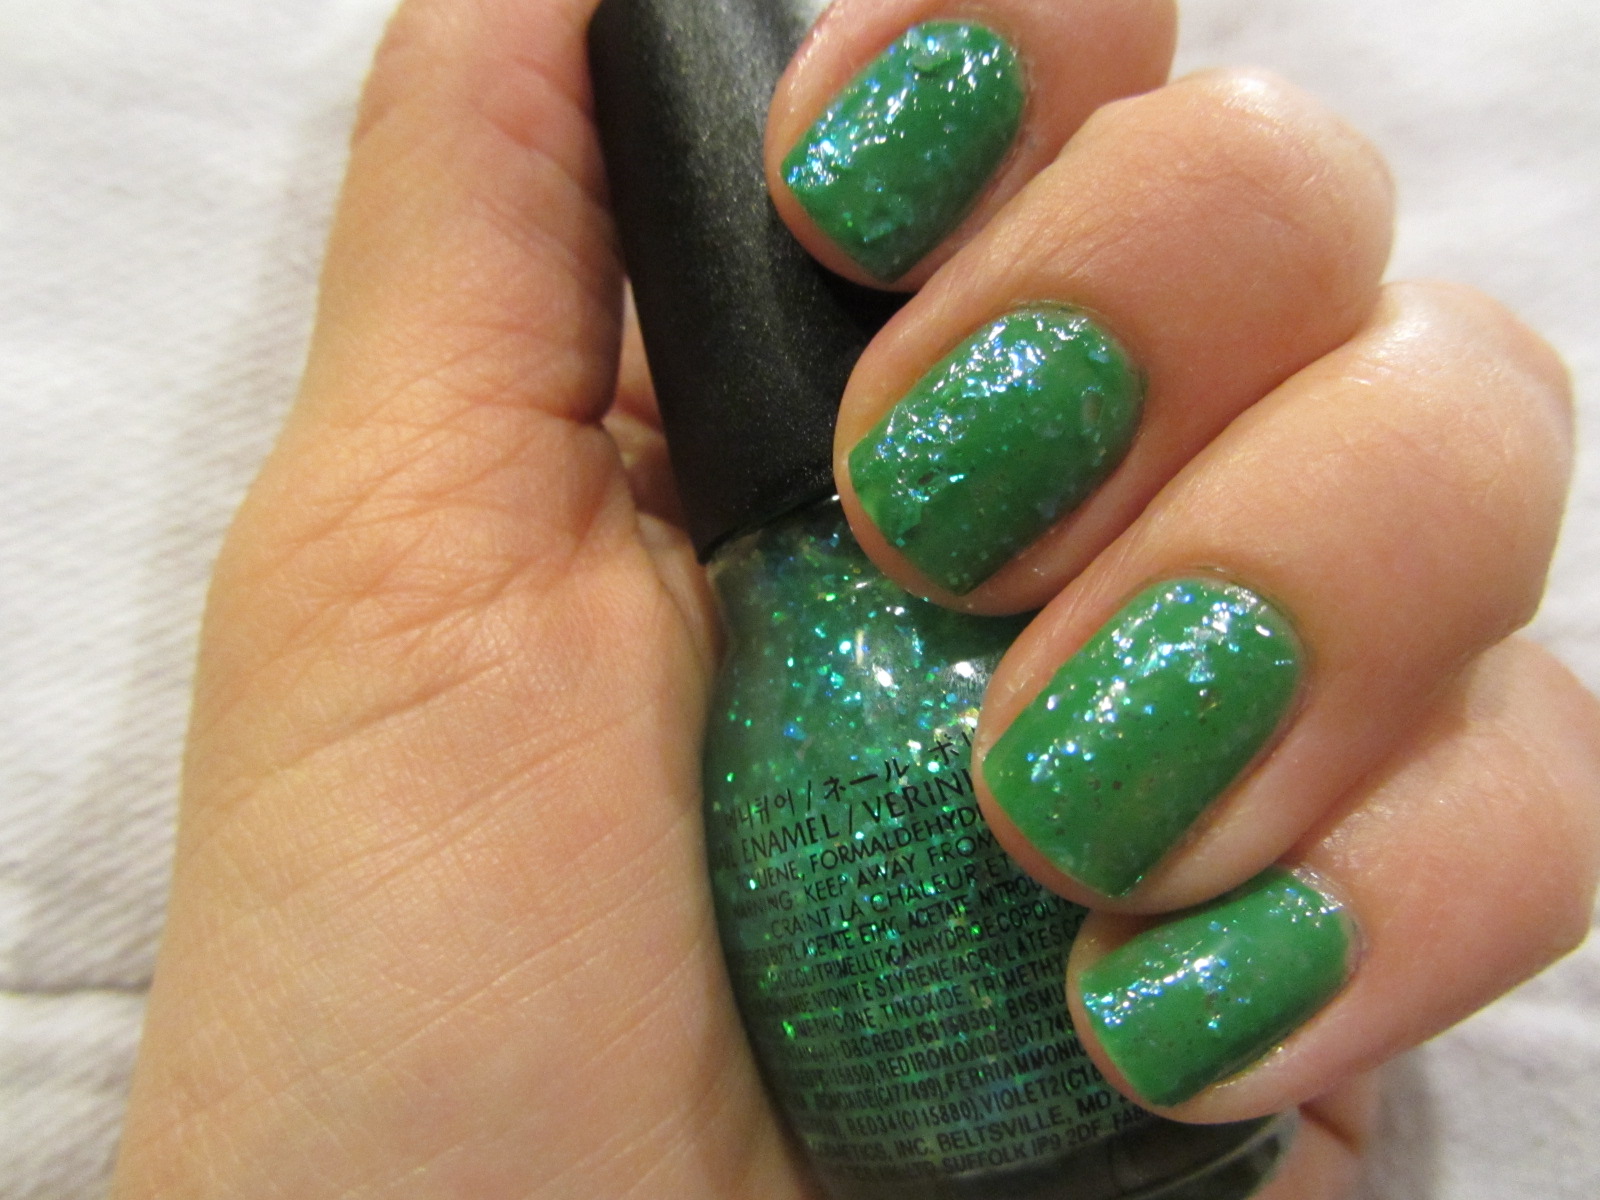 2. "Chic St Patrick's Day Nails" - wide 3